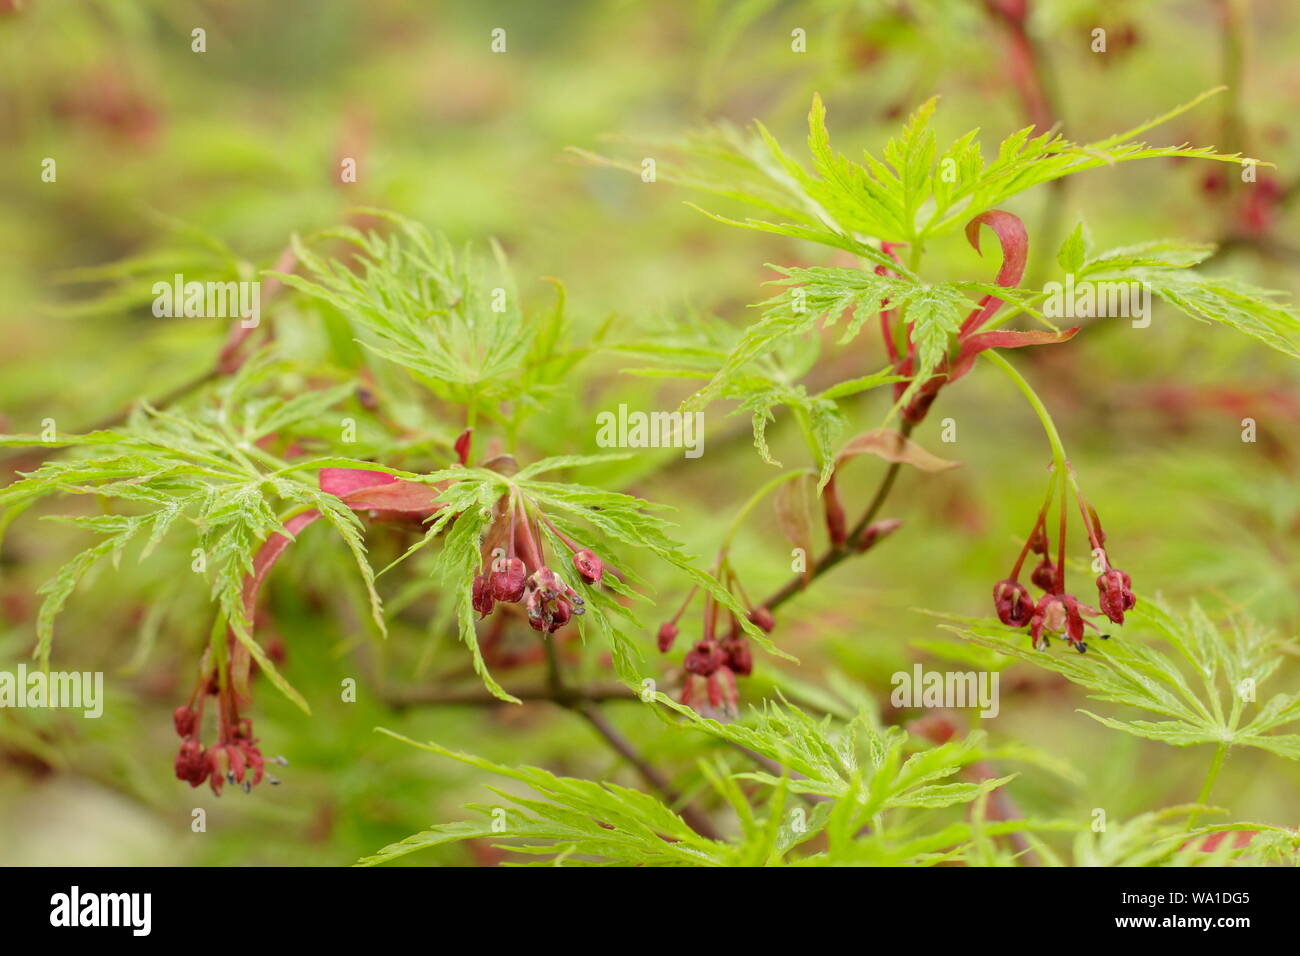 Acer palmatum 'Seiryu'  dis[laying characteristic fruits and early foliage in mid spring. UK. AGM Stock Photo